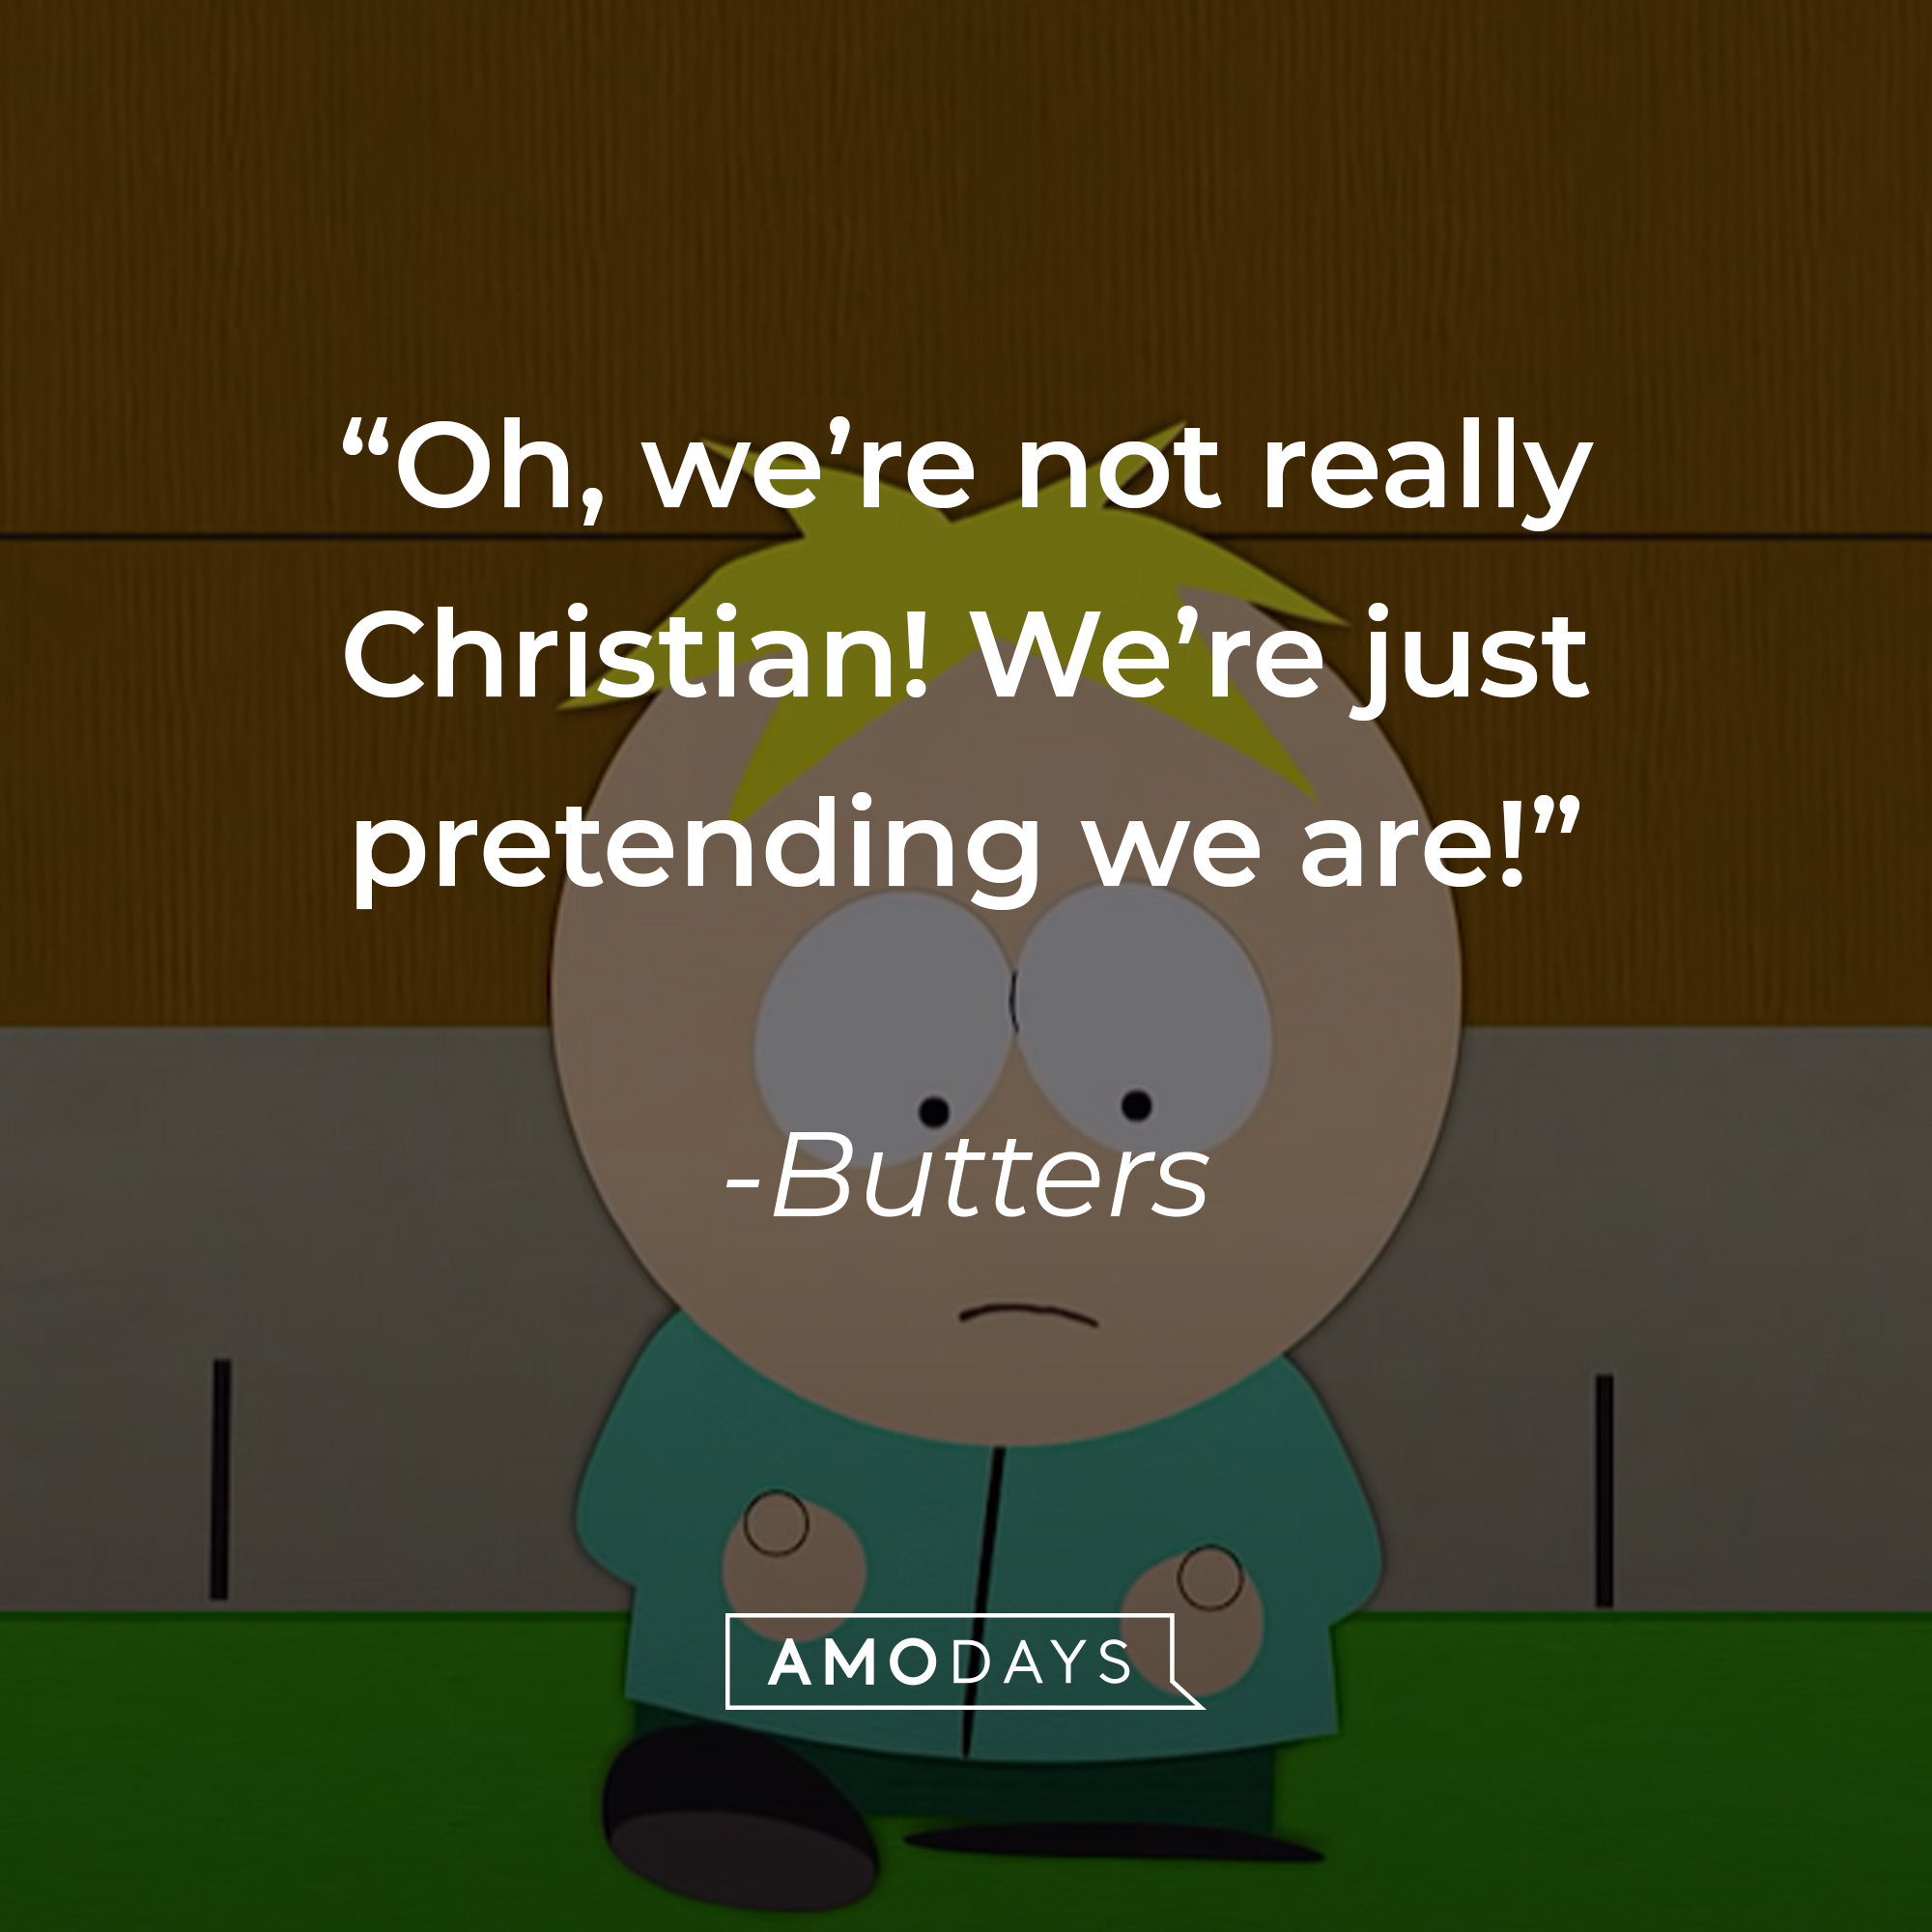 Butters' quote: "Oh, we're not really Christian! We're just pretending we are!" | Source: youtube.com/southpark